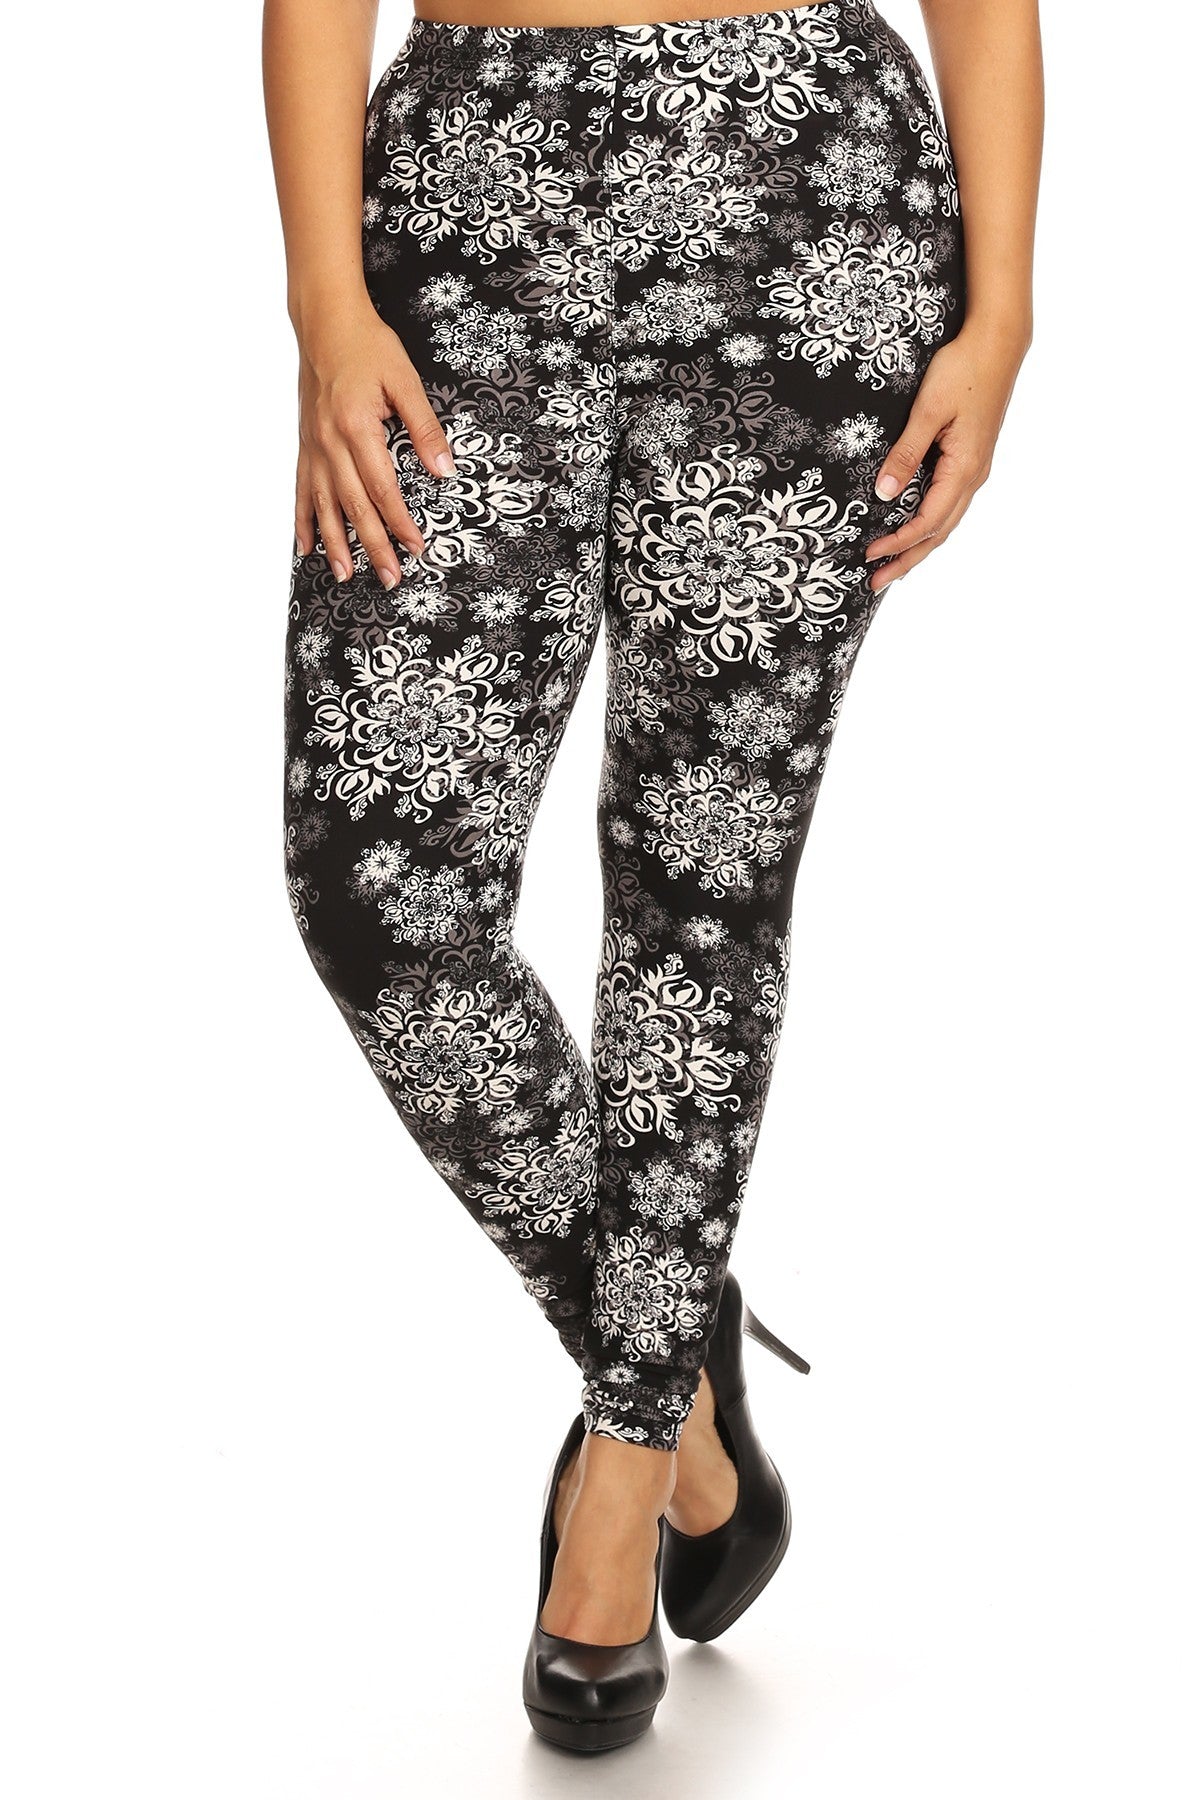 Voluptuous (+) Plus Size Abstract Print, Full Length Leggings - Ships from The USA - women's leggings at TFC&H Co.